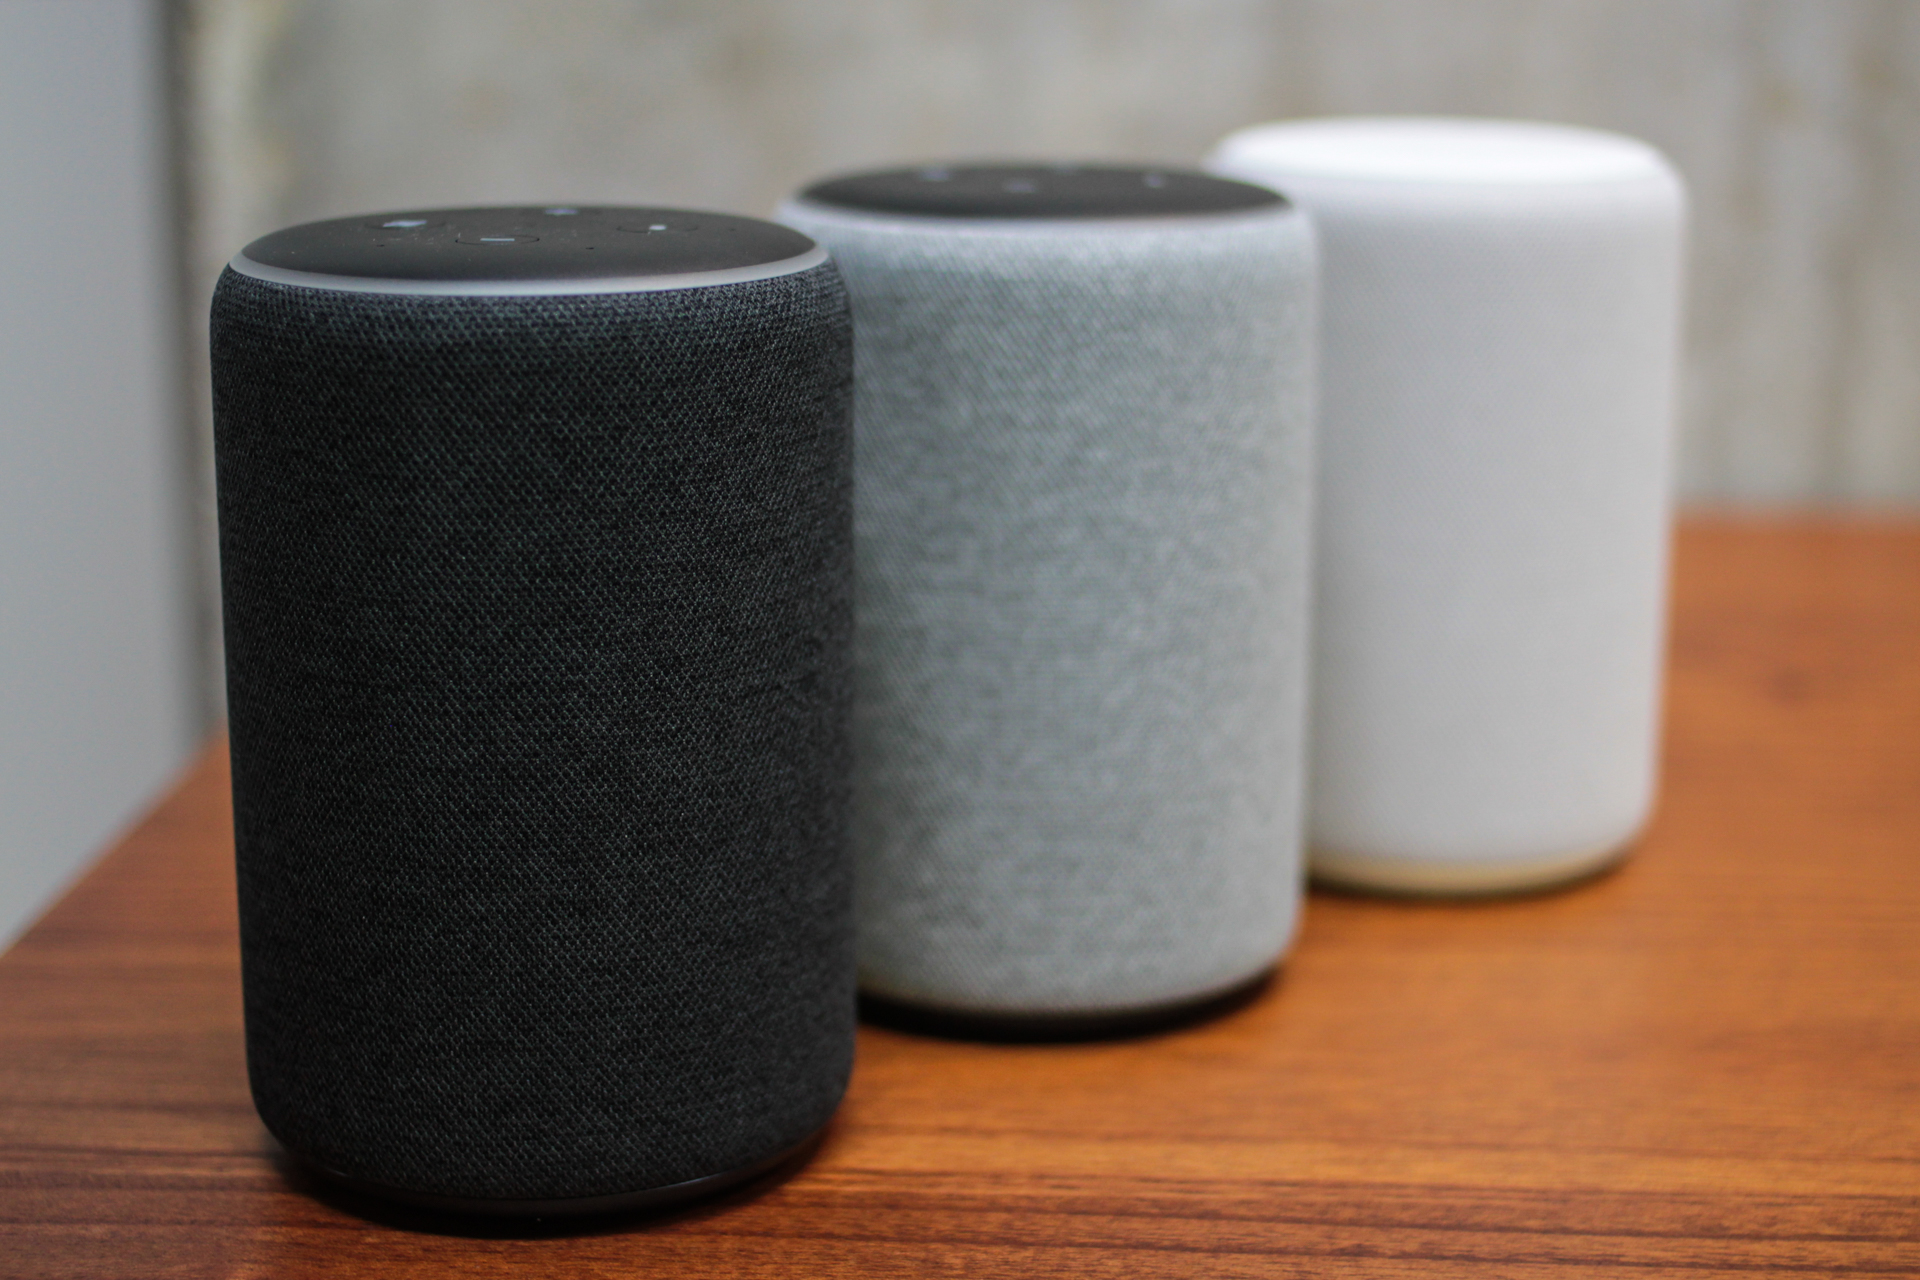 Alexa S New Song Id Feature Can Announce What Music Is Playing Next Techcrunch